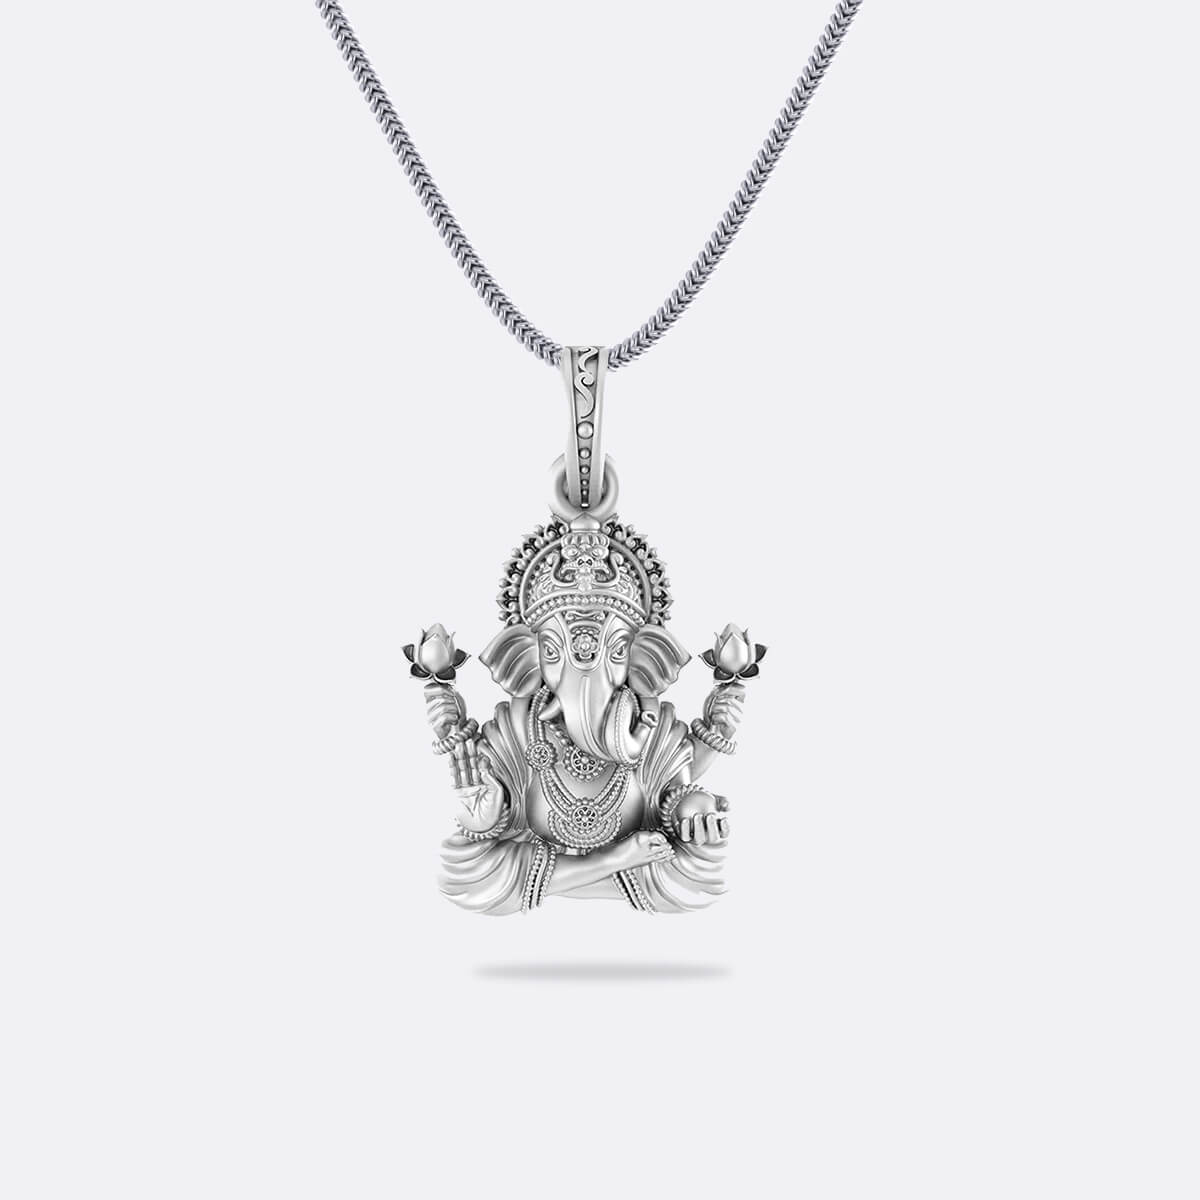 Lord Ganesha Pendant With Silver Chain